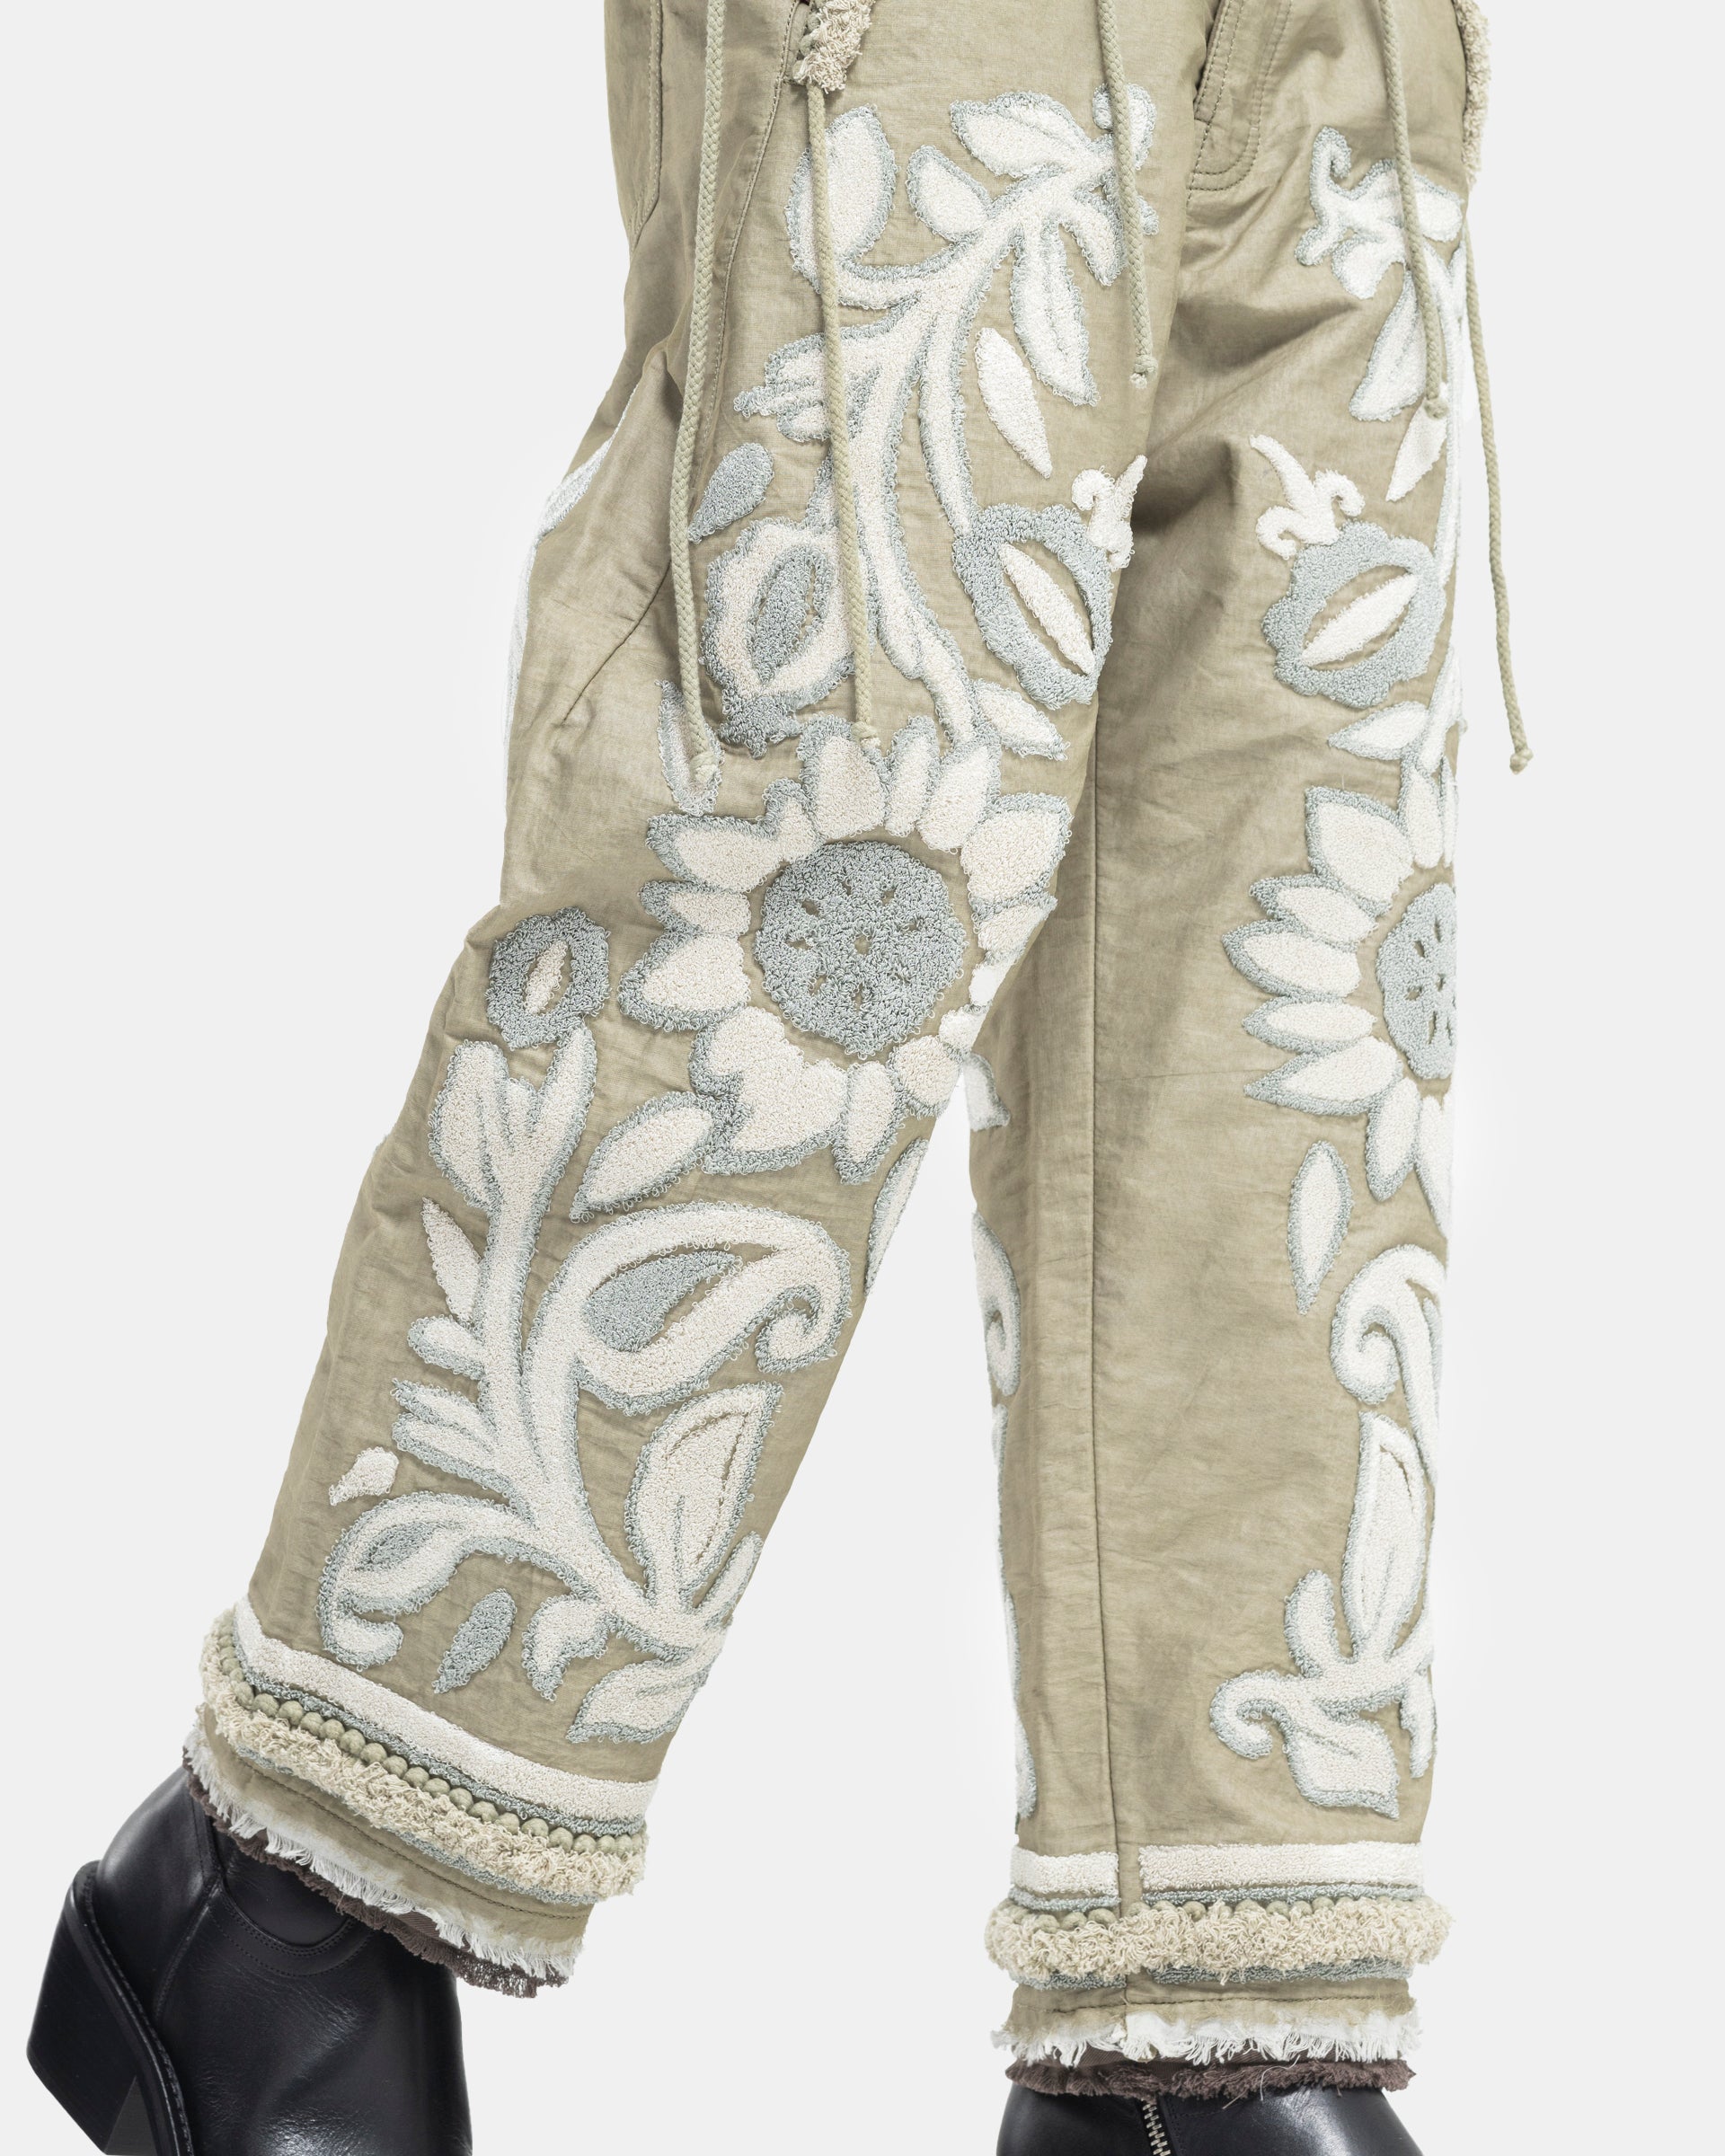 Tapestry Trousers in Beige